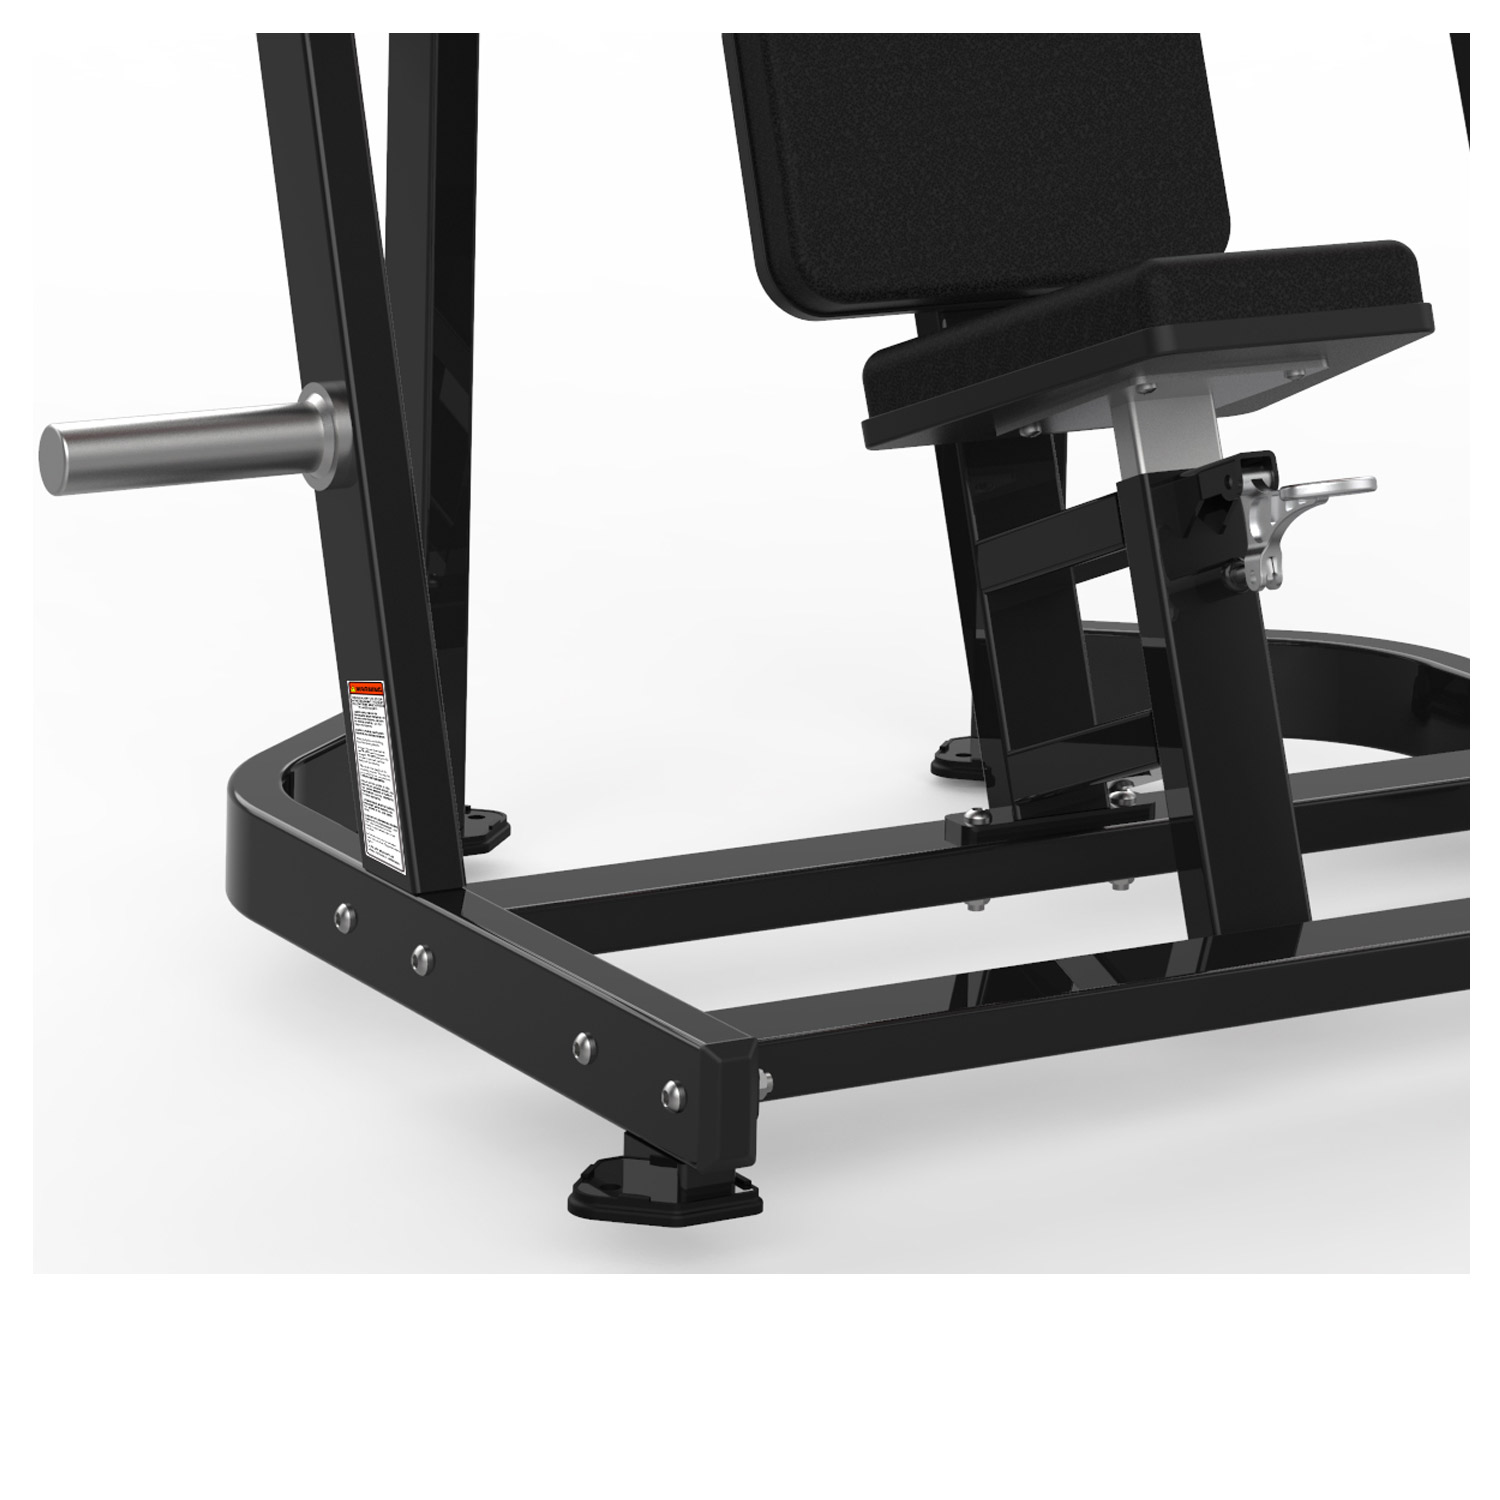 RS-1001 Iso-Lateral Bench Press